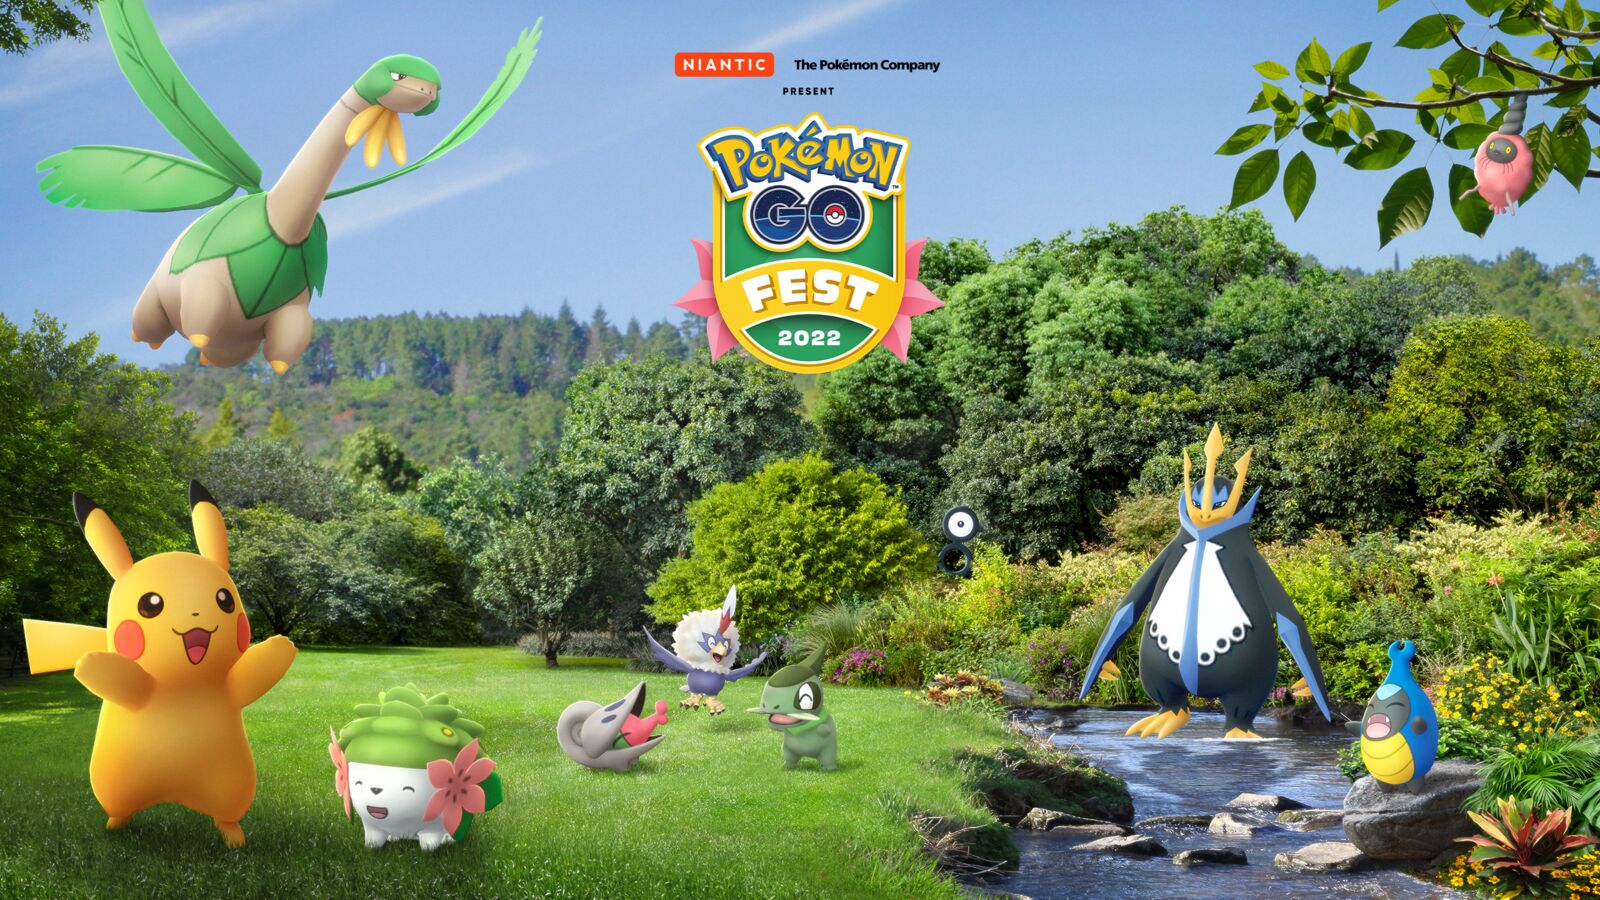 Pokemon Go Fest 2022 tickets are now available